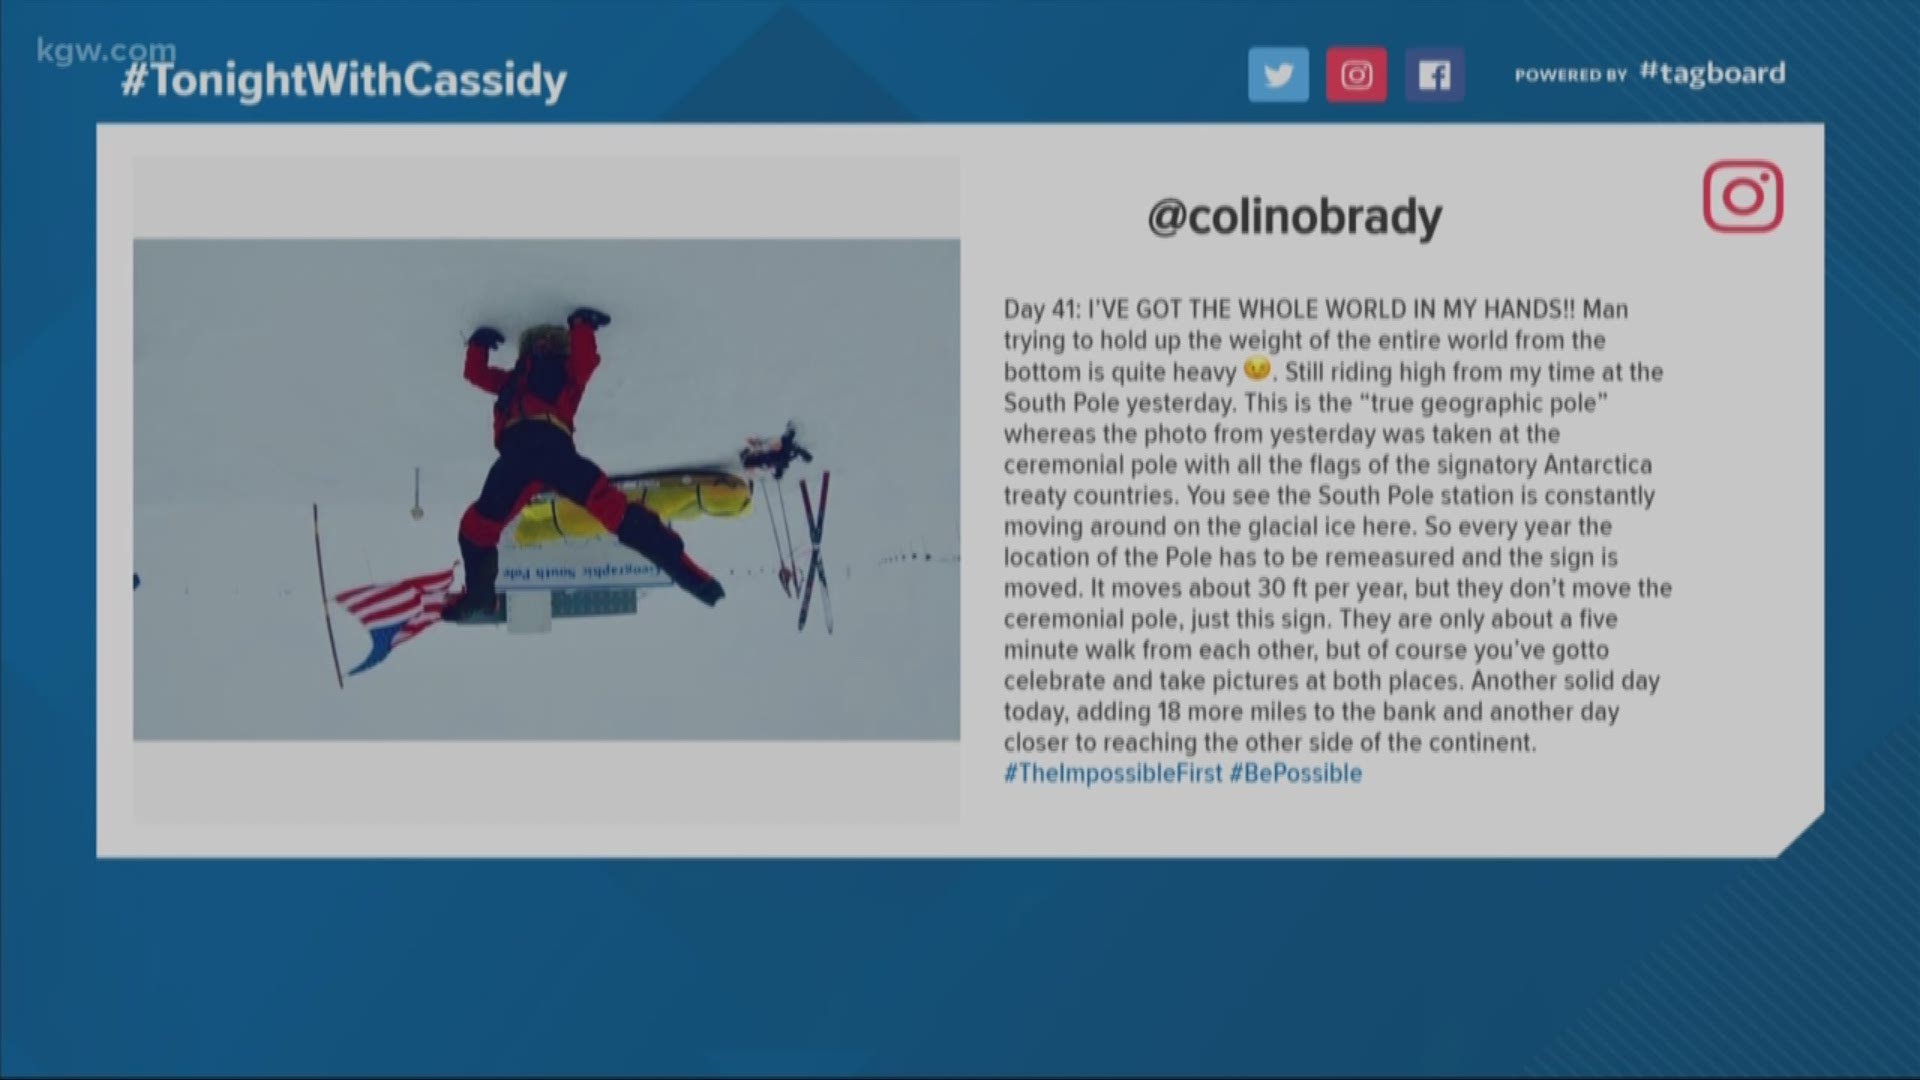 Congrats to Colin O'Brady who has made it to the South Pole 

#TonightwithCassidy